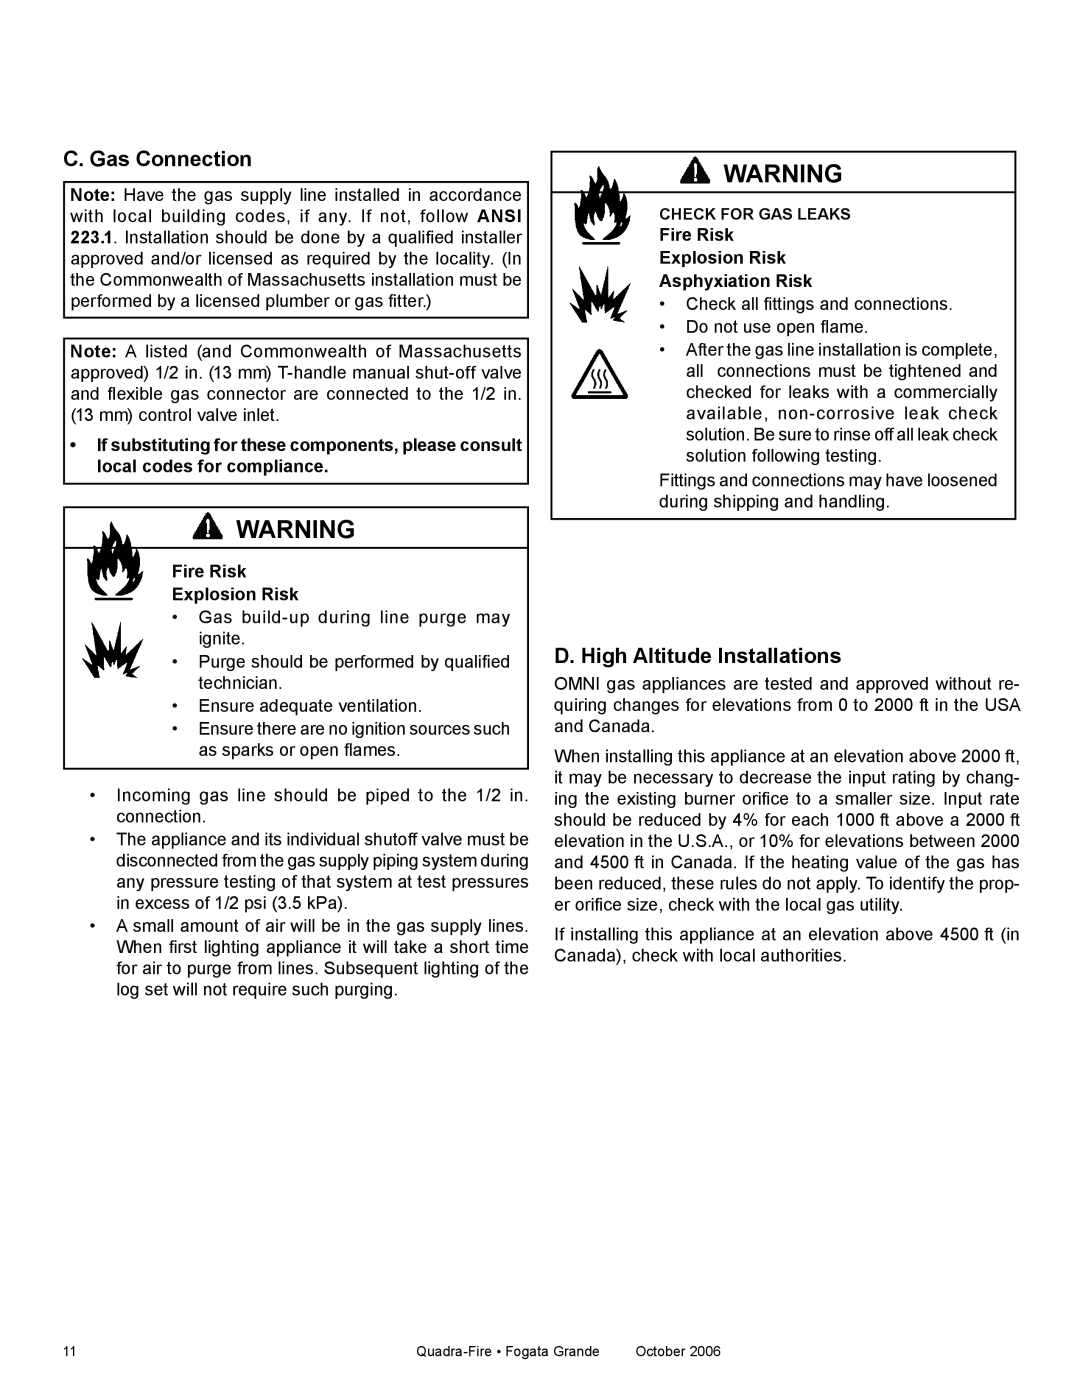 Quadra-Fire FG21SP-NG, FG21SP-LP owner manual C. Gas Connection, D. High Altitude Installations, Fire Risk Explosion Risk 